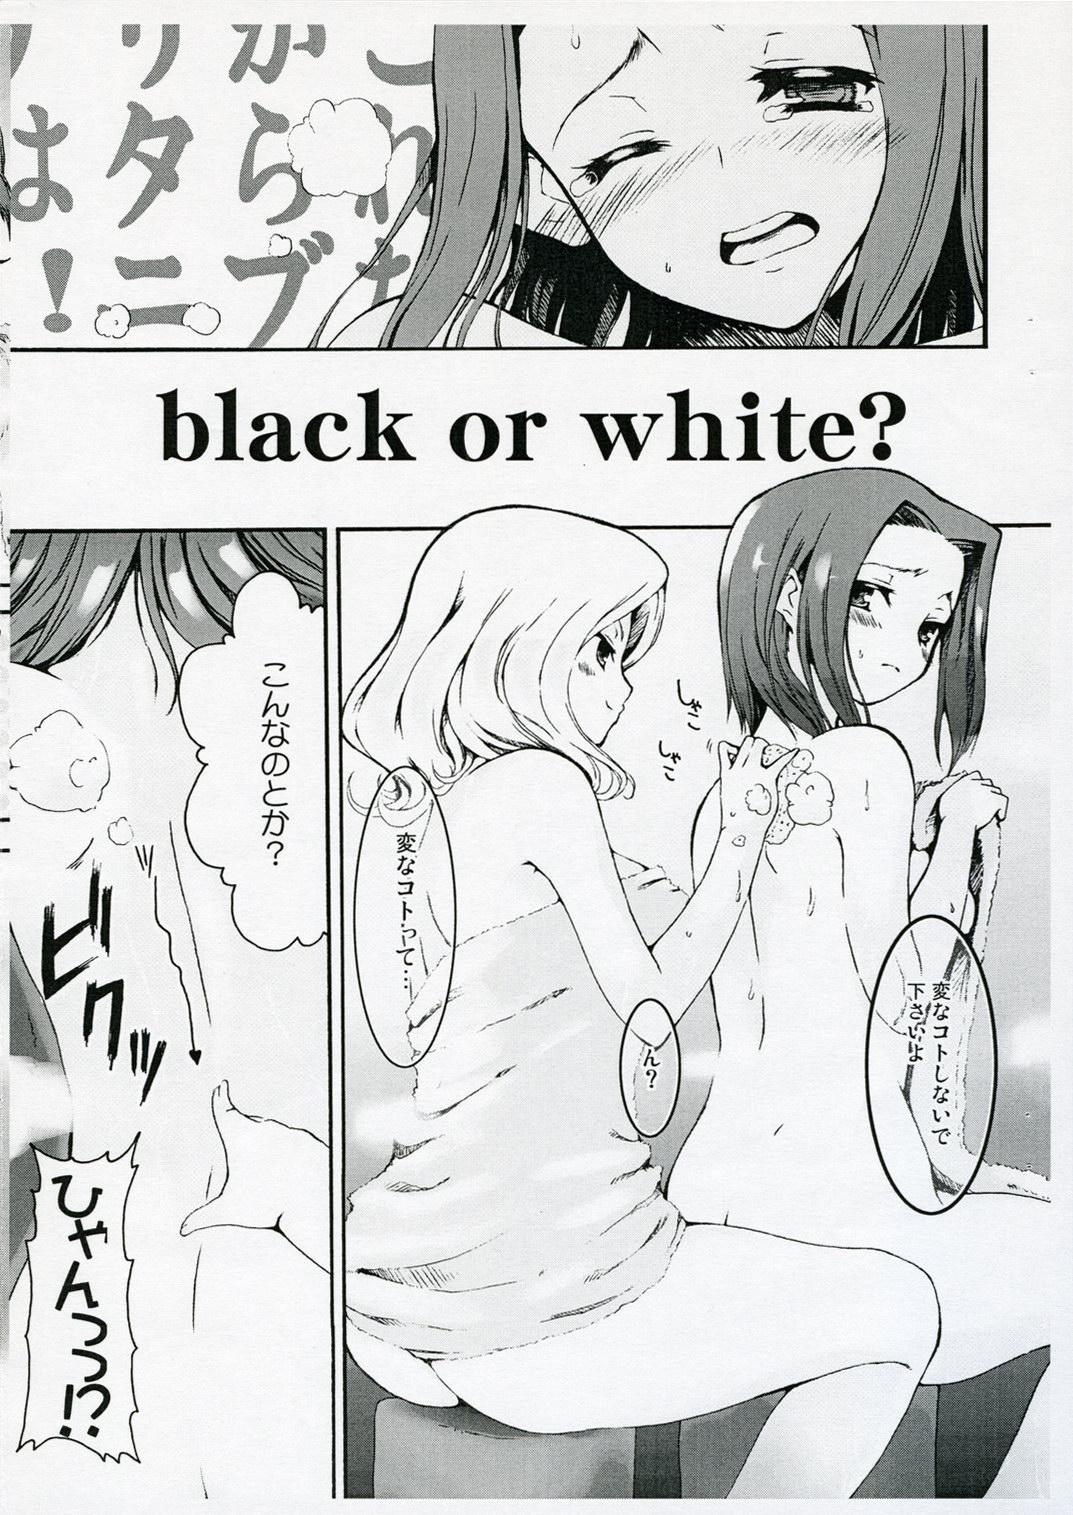 Tittyfuck black or white? - Code geass Gostosa - Page 4